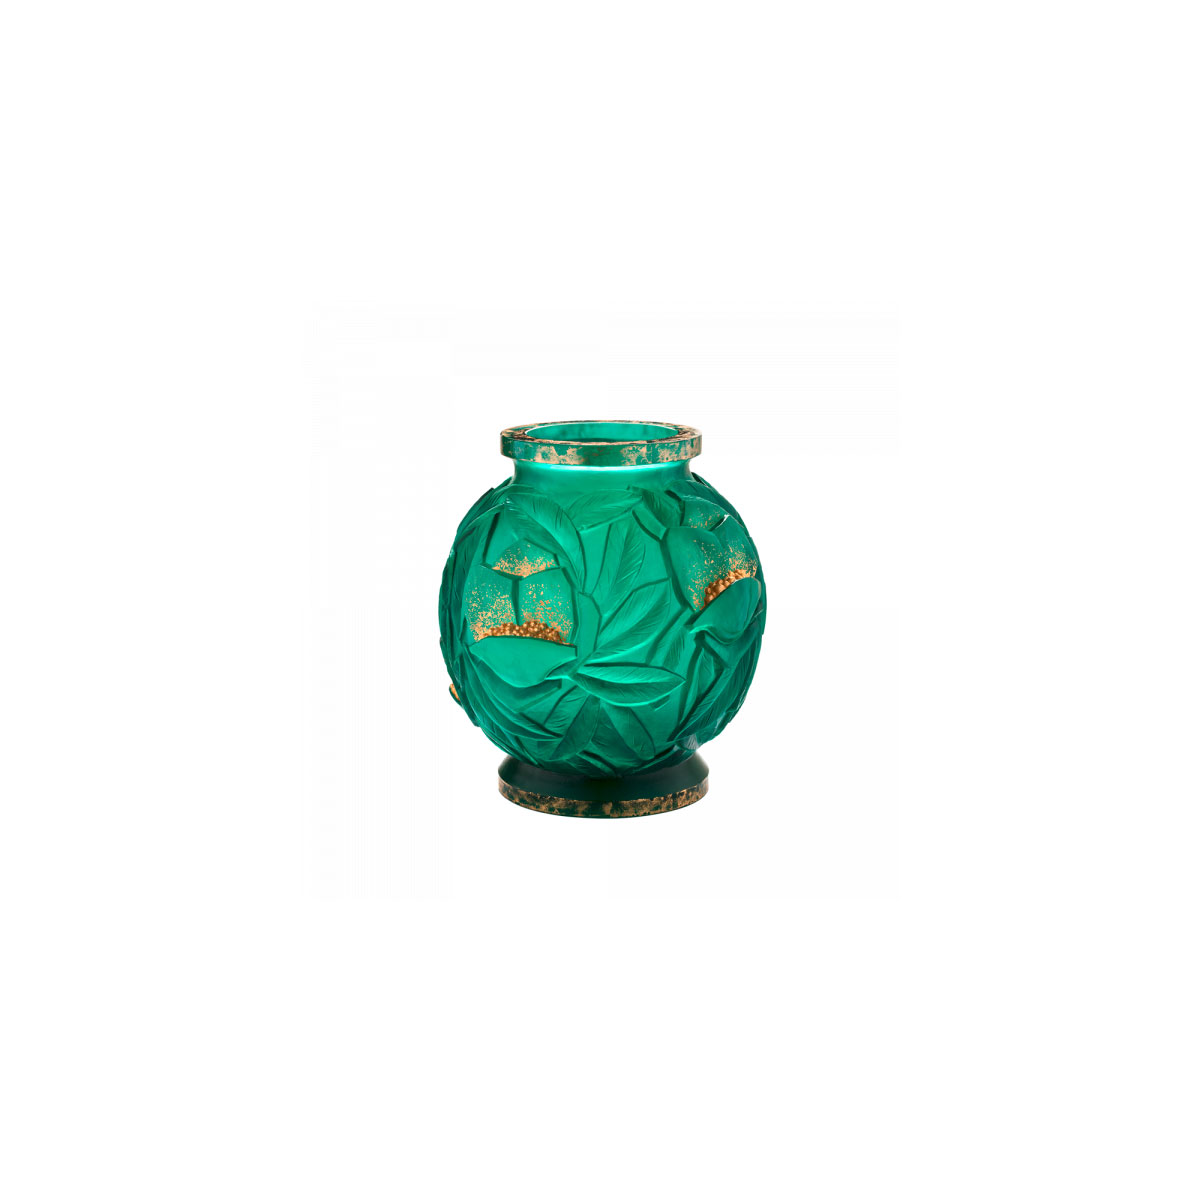 Daum 13.4" Empreinte Vase in Green and Gold, Limited Edition